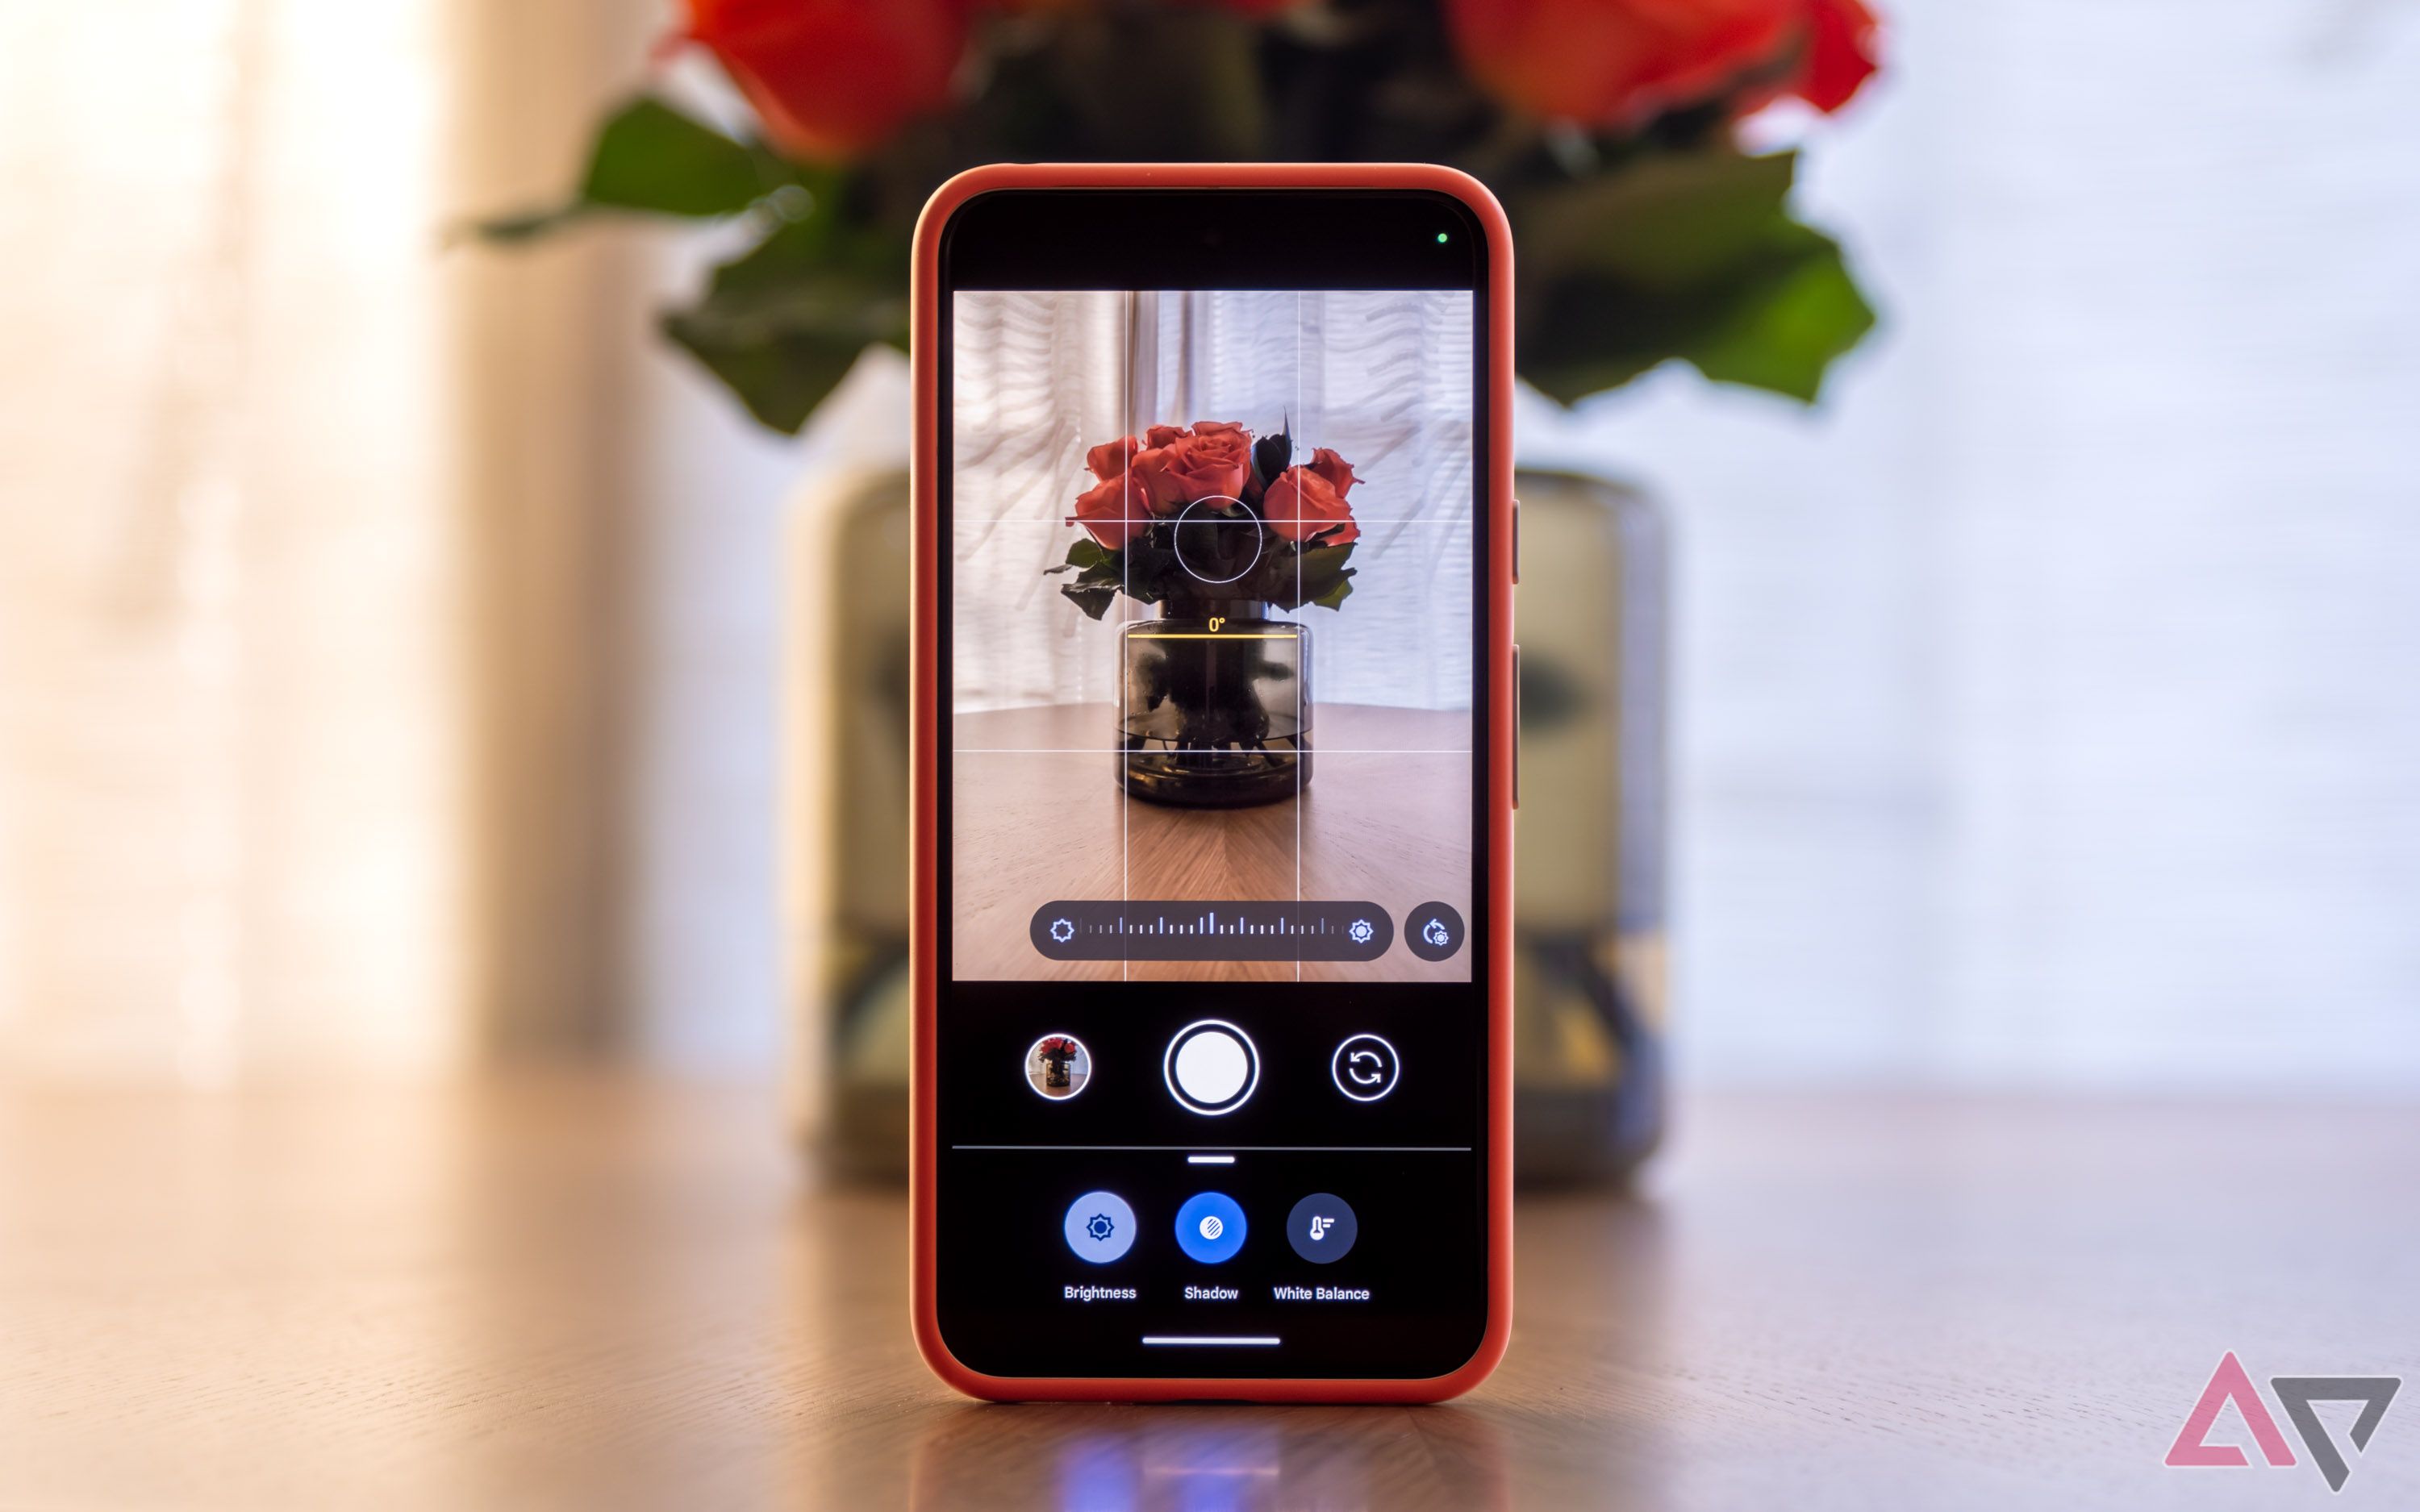 The Camera app on a Pixel phone resting upright on a table with a vase of flowers.